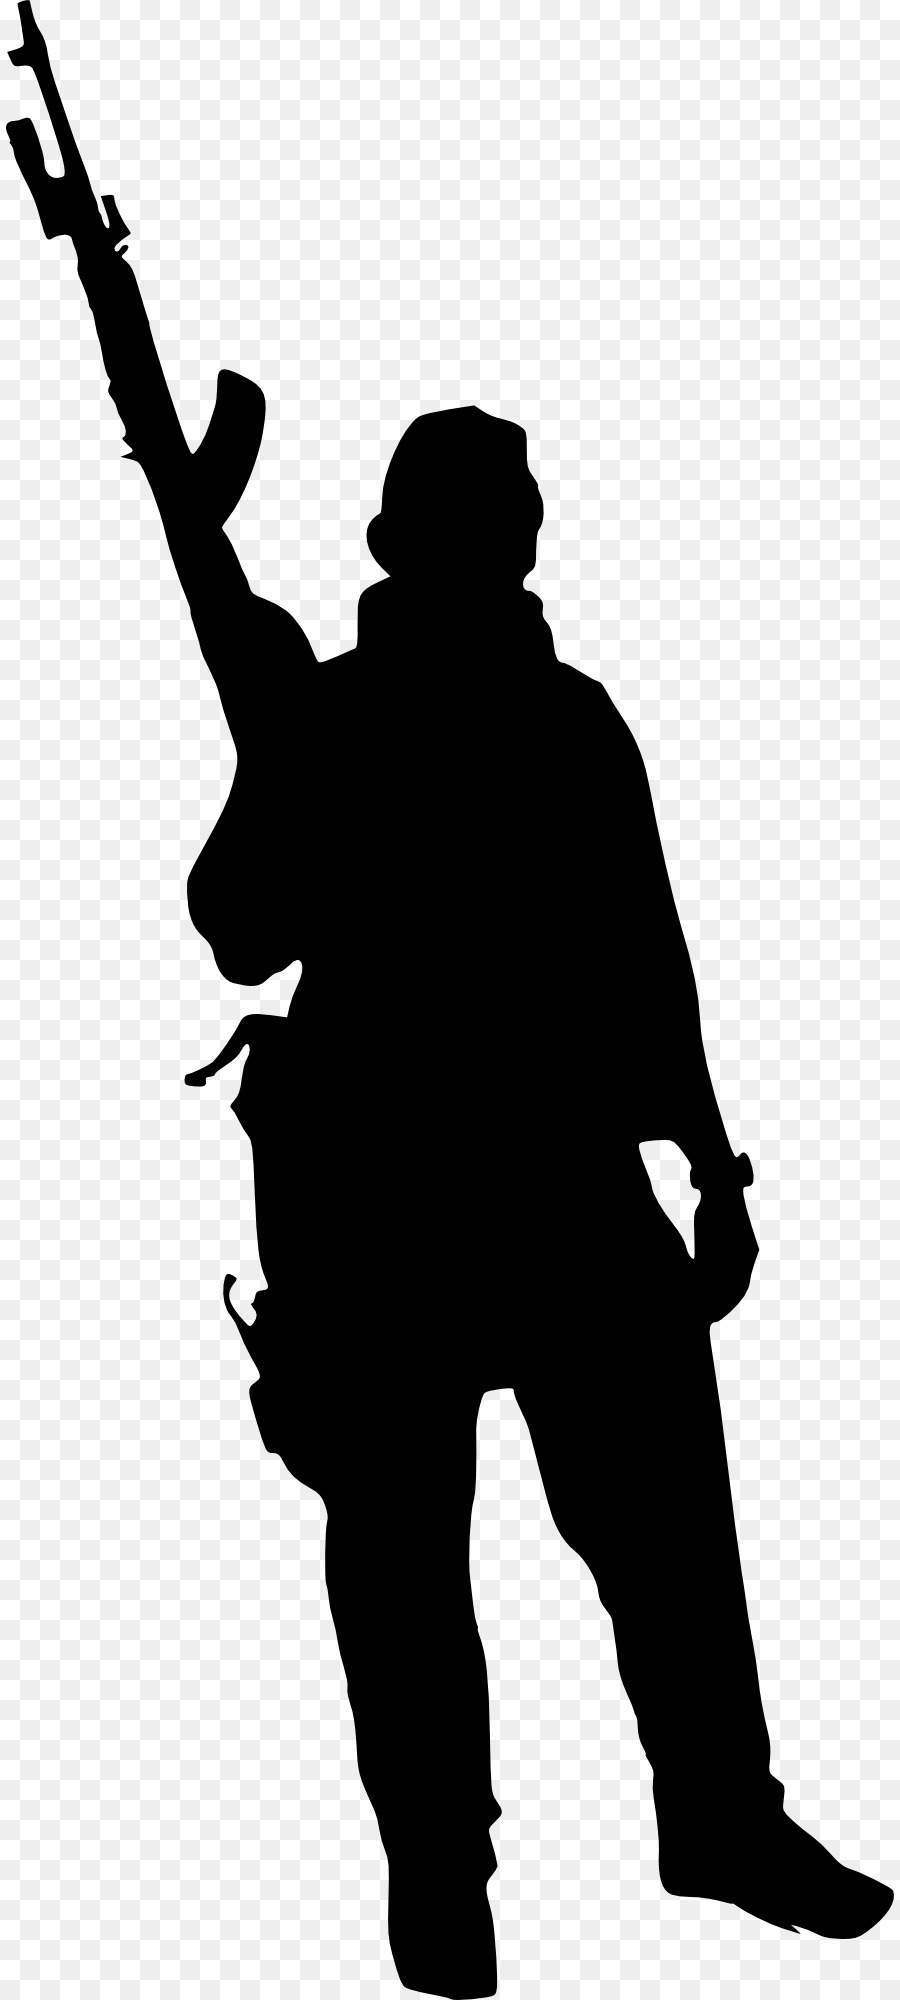 Silhouette Soldier Military - Soldier png download - 888*2000 - Free Transparent Silhouette png Download.